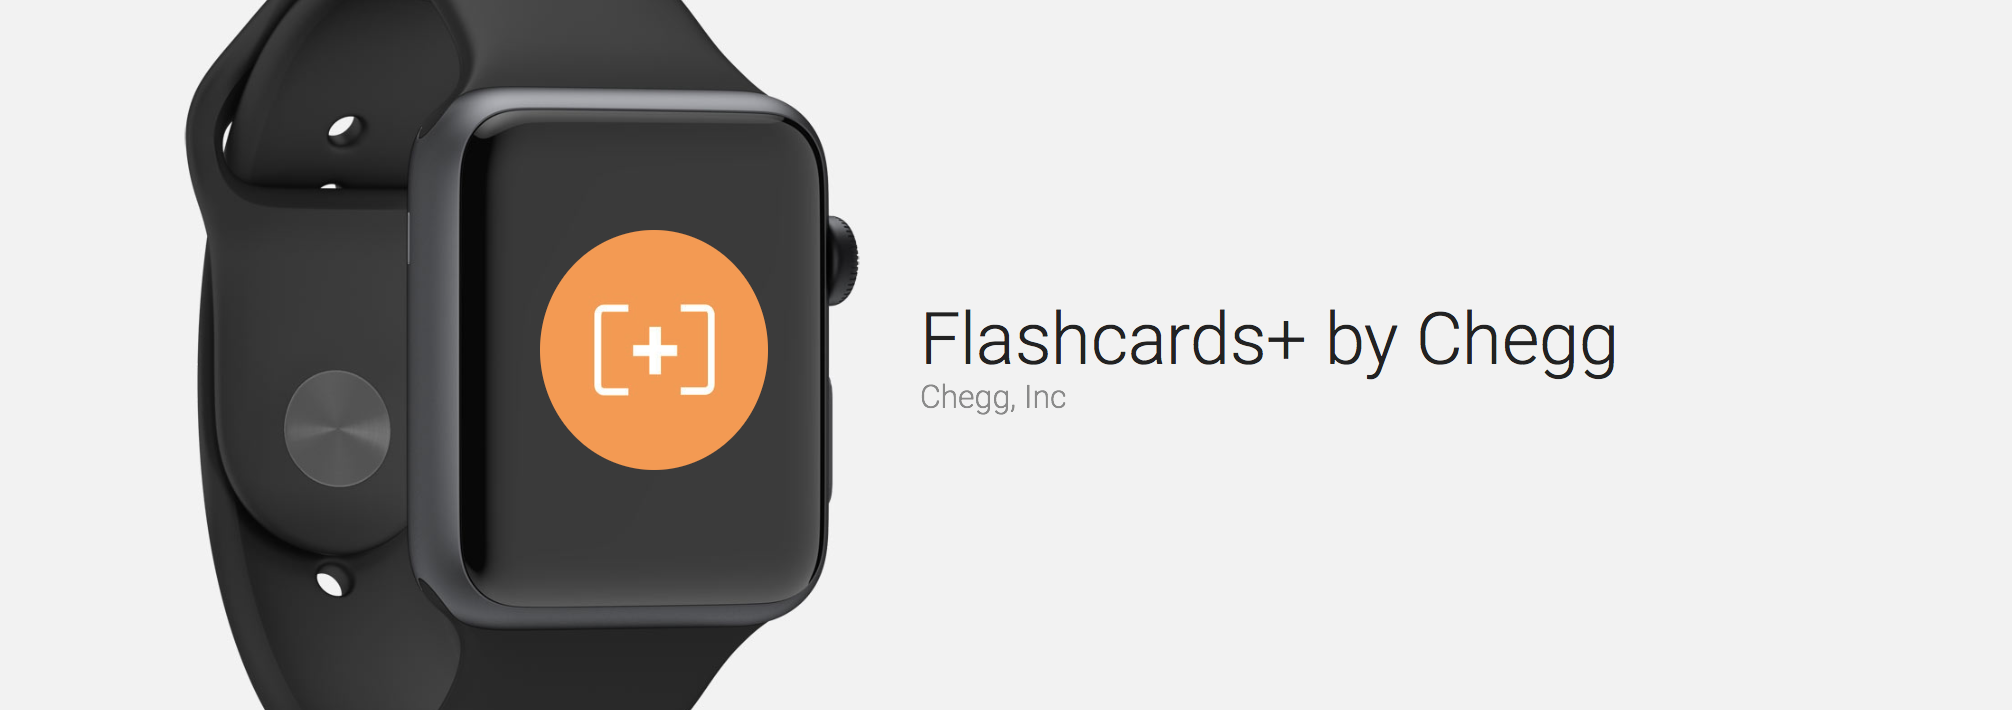 Flashcards+ by Chegg a Must-Have App for Students